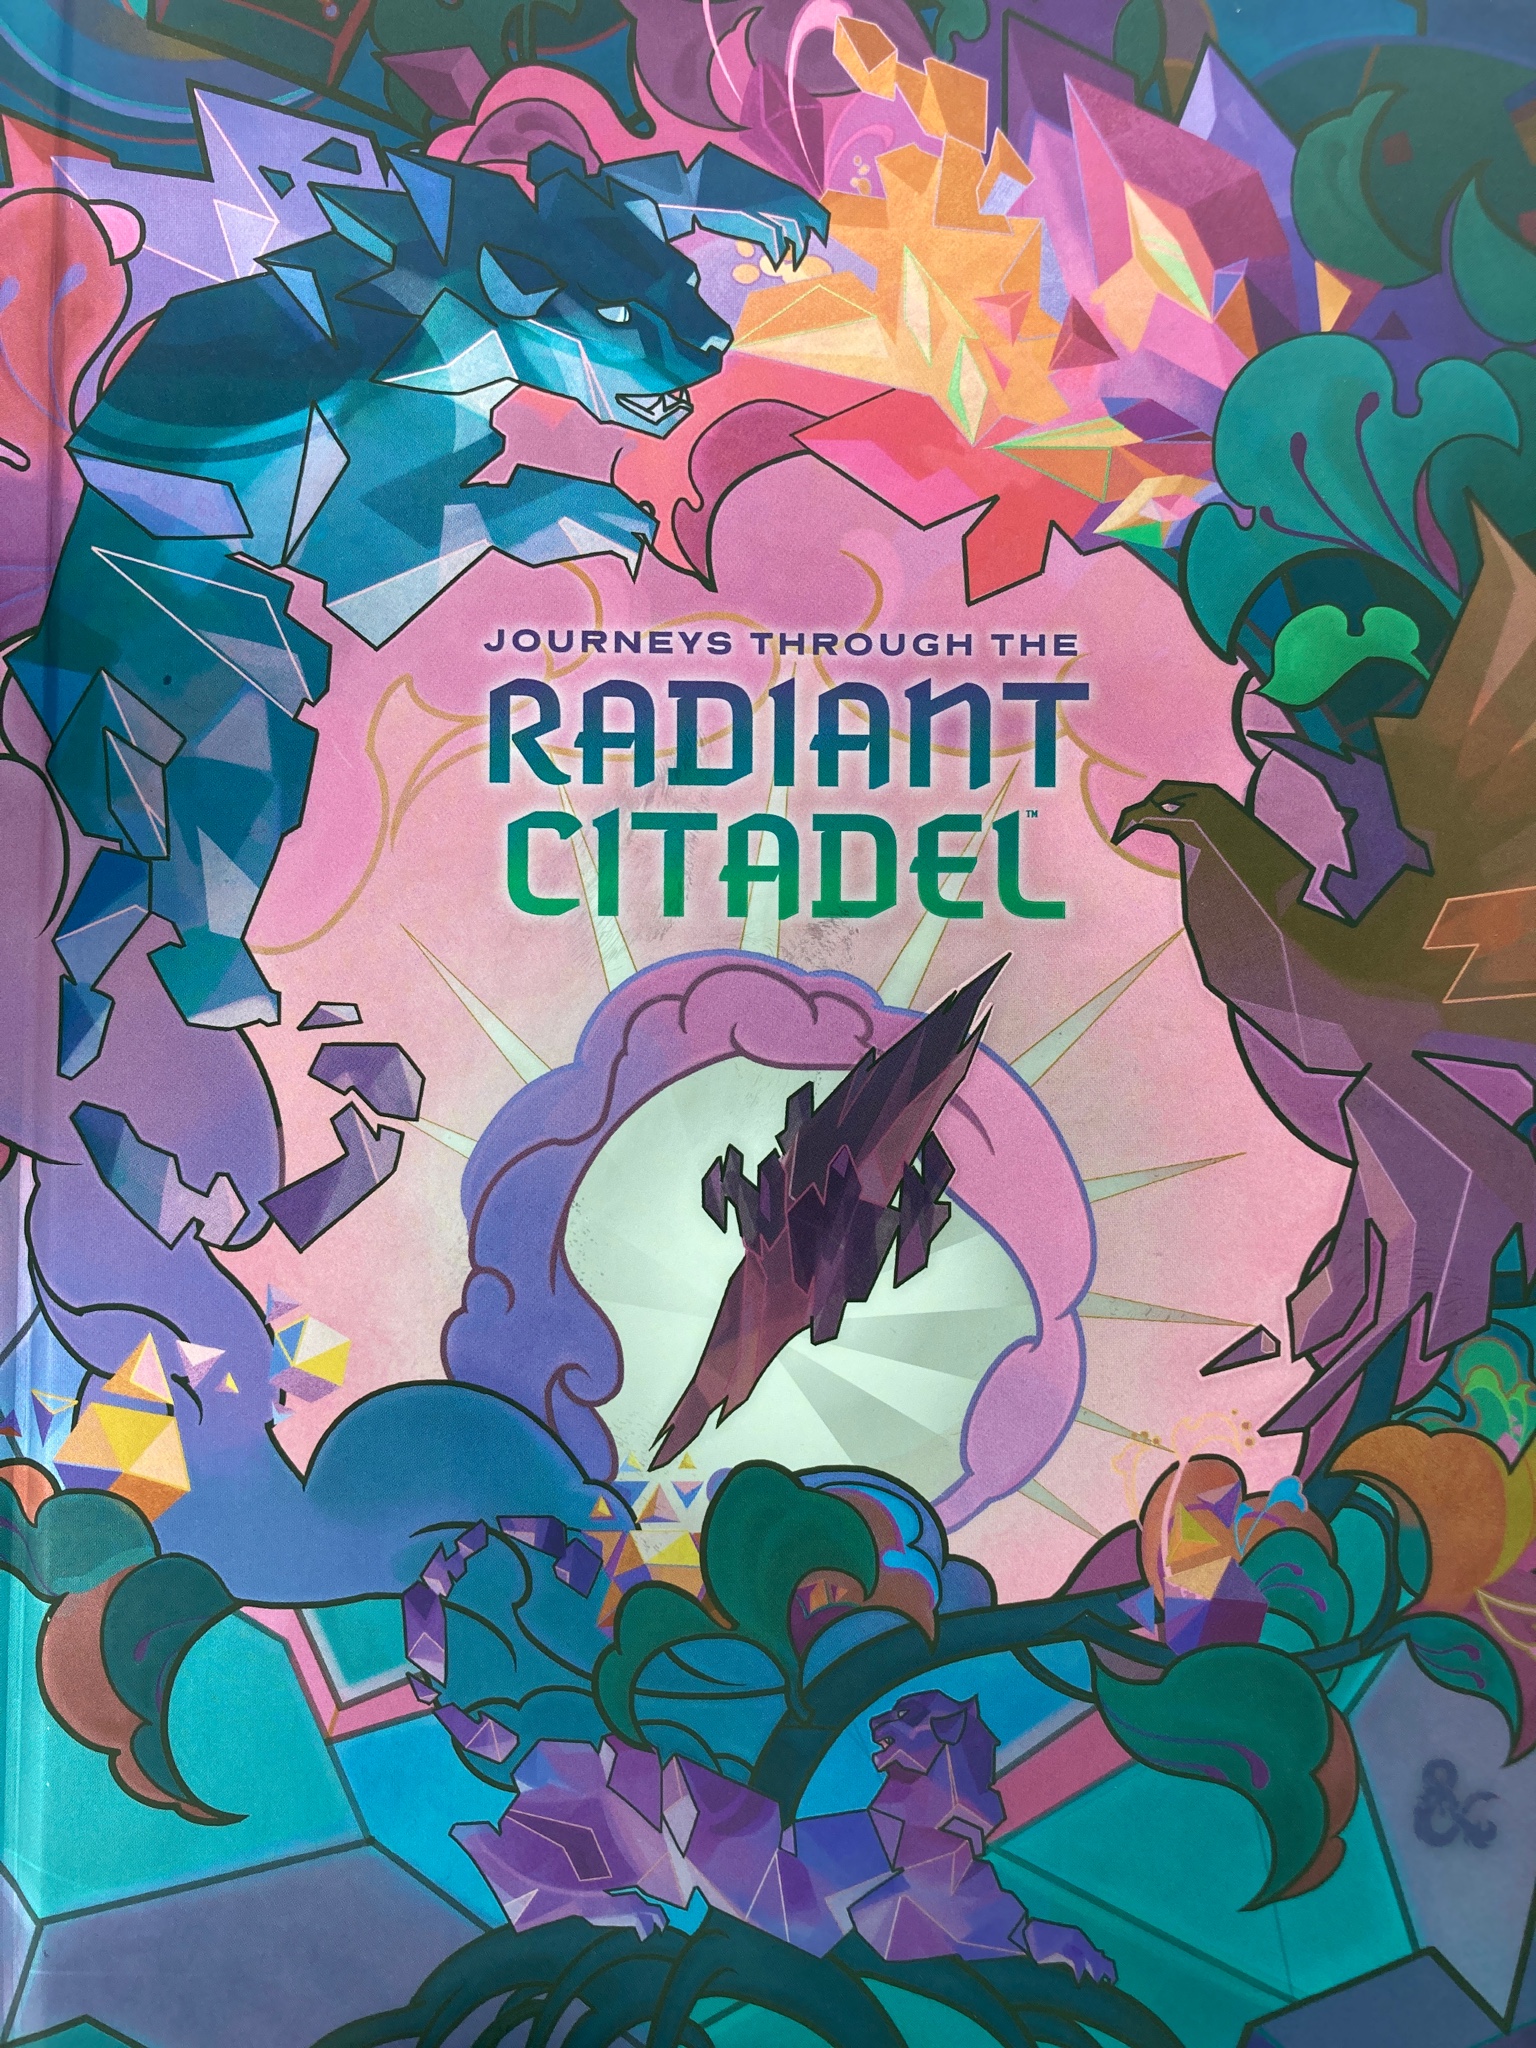 This is an image of the cover of the Journeys Through the Radiant Citadel; stylized beings in rainbow-like colors.